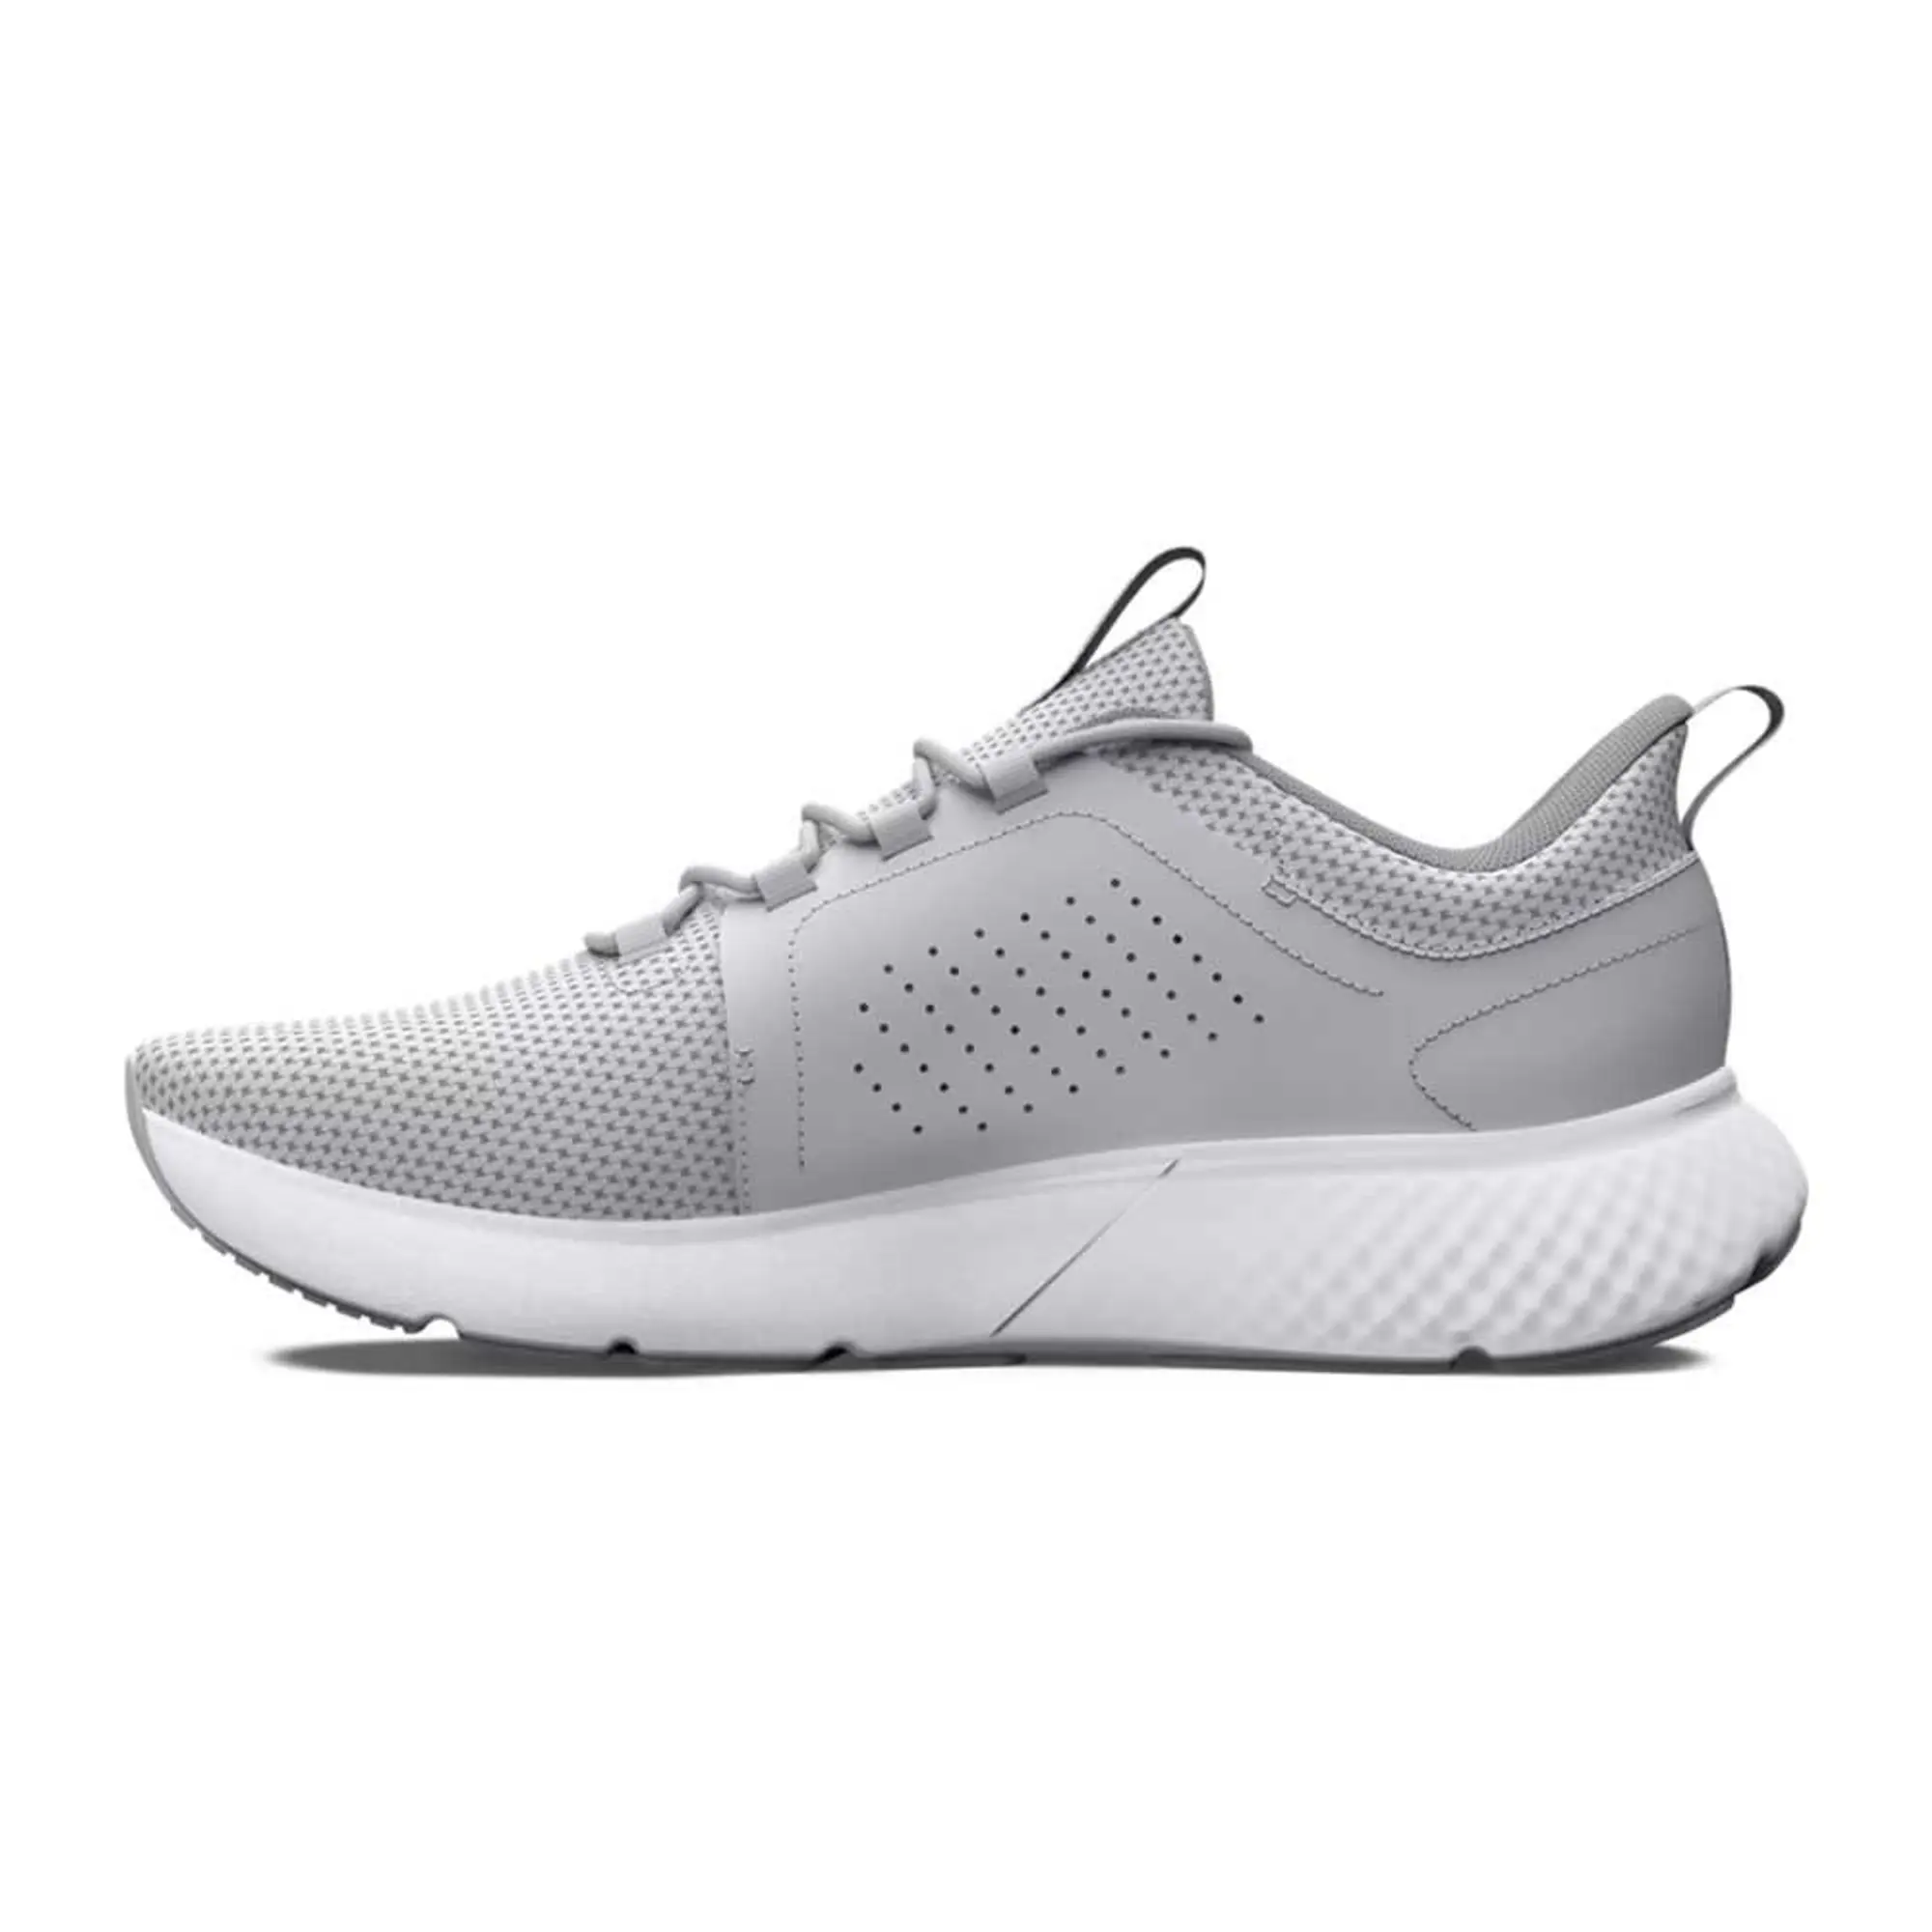 Under Armour Charged Decoy Running Shoes - Grey | 3026681-100 | FOOTY.COM